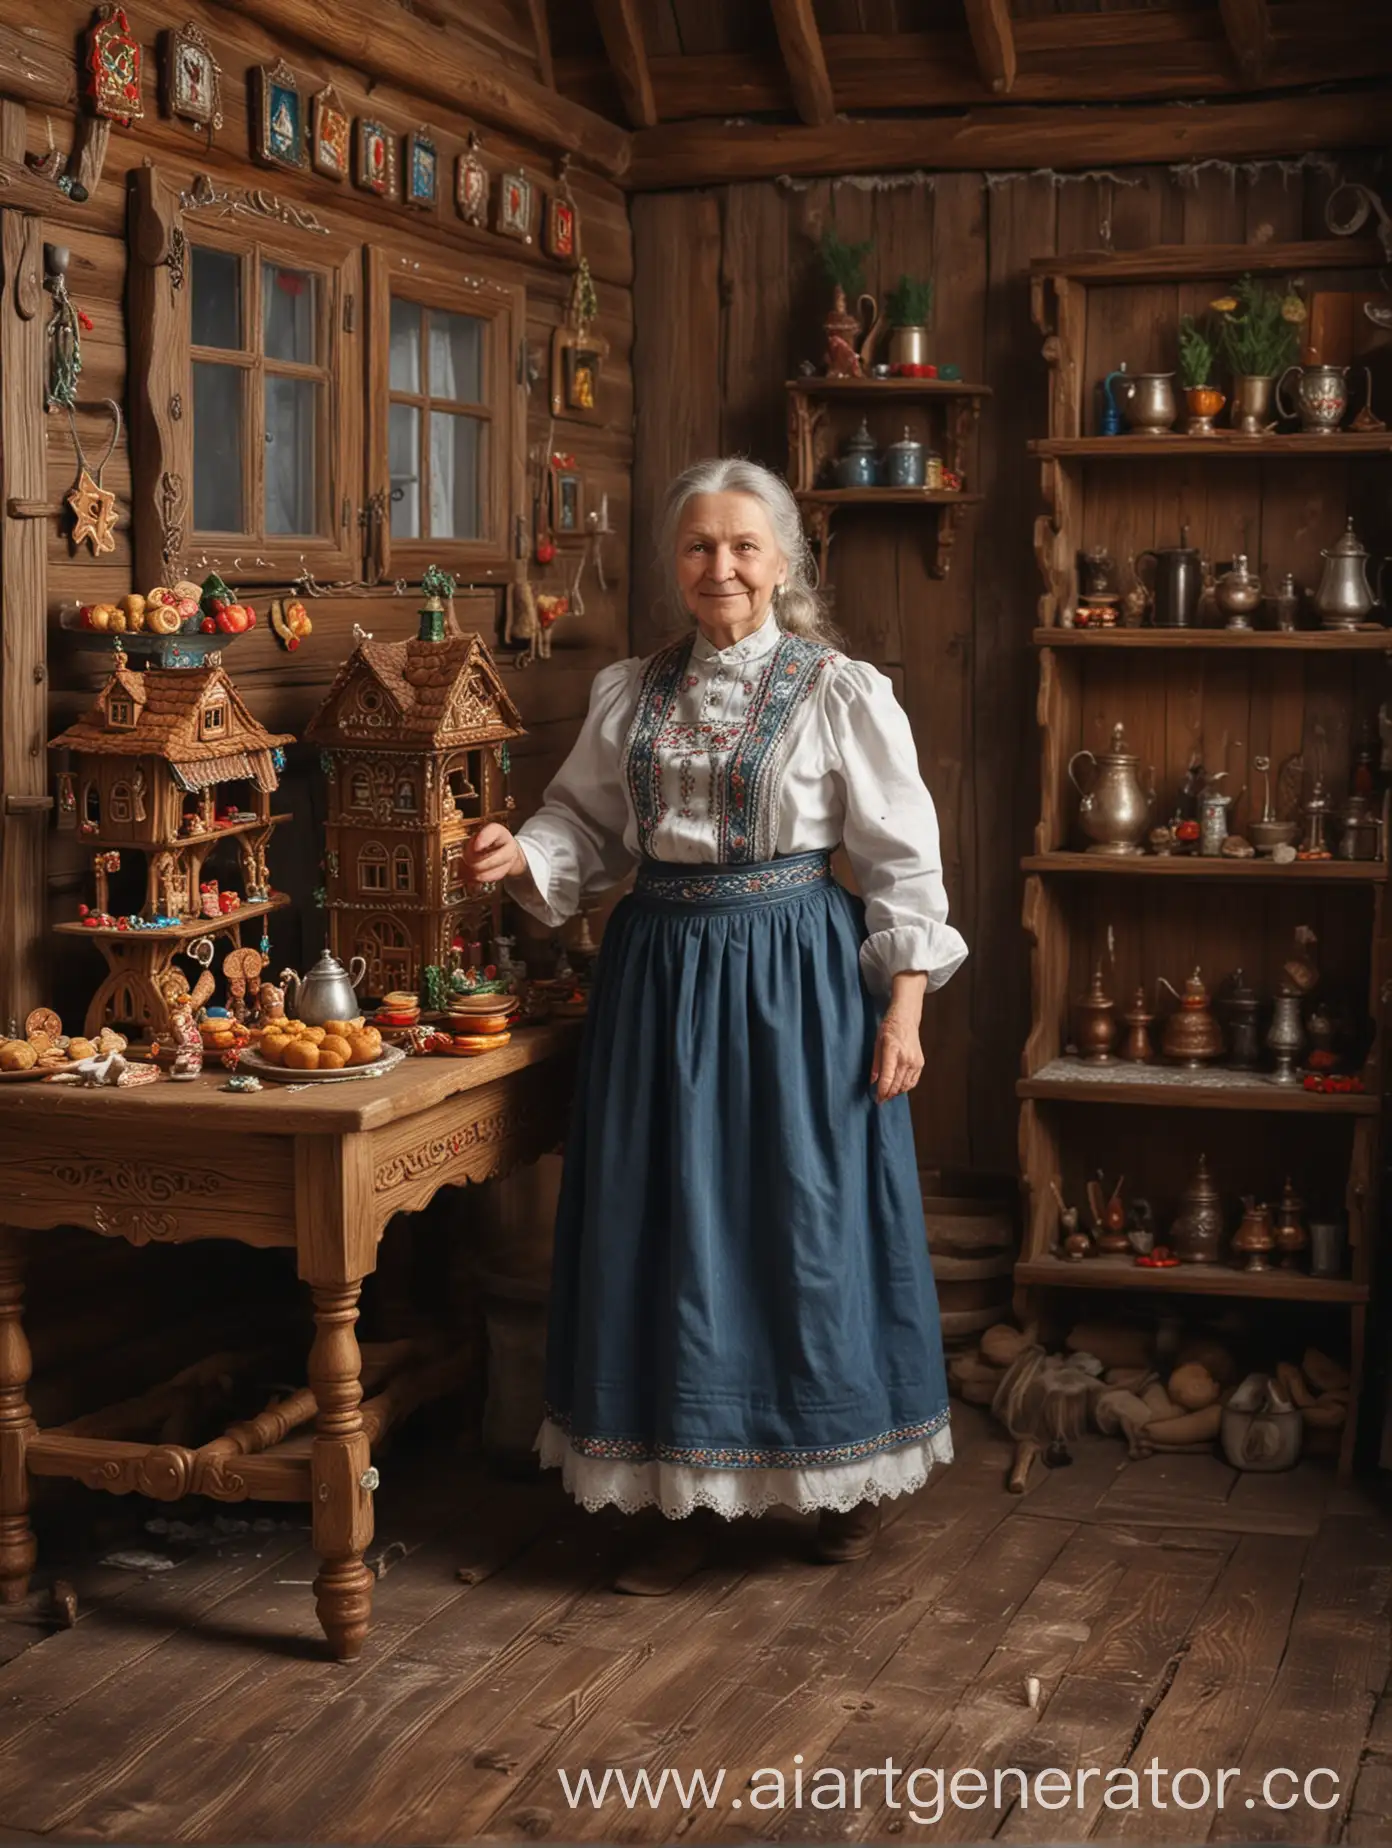 Slavic-Grandmother-Dancing-by-Samovar-and-Gingerbread-in-Wooden-House